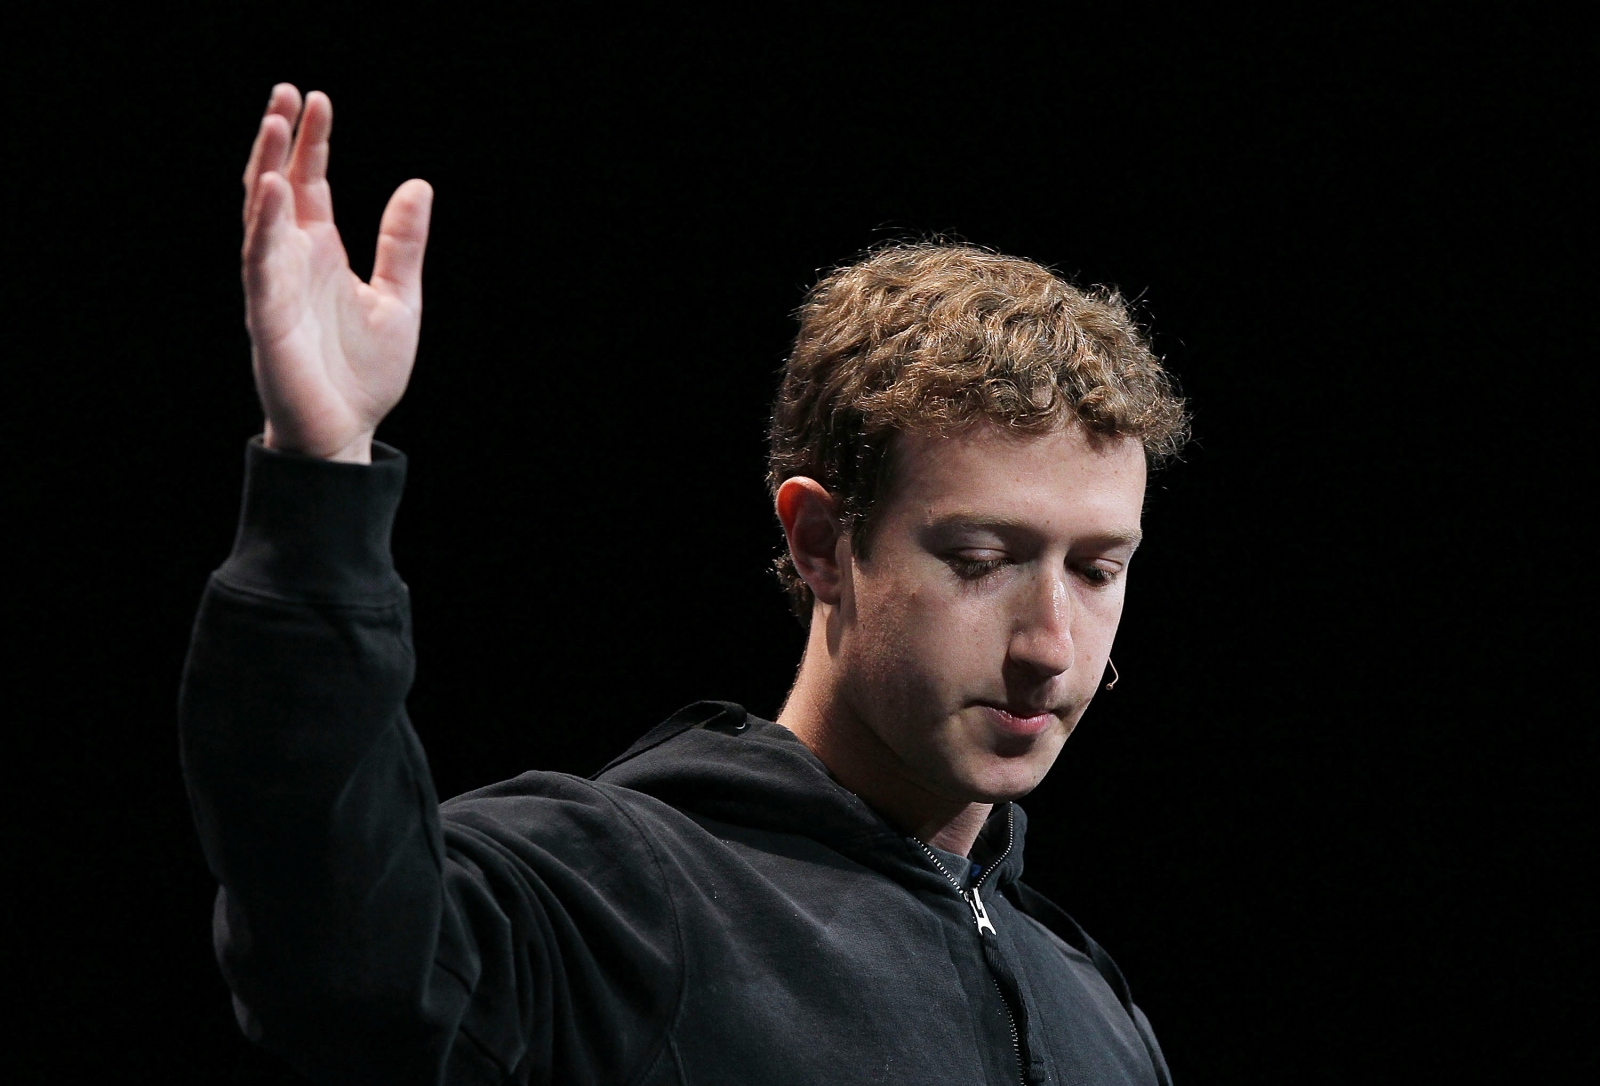 We should fear Mark Zuckerberg's power and his utopian vision for the future1600 x 1086